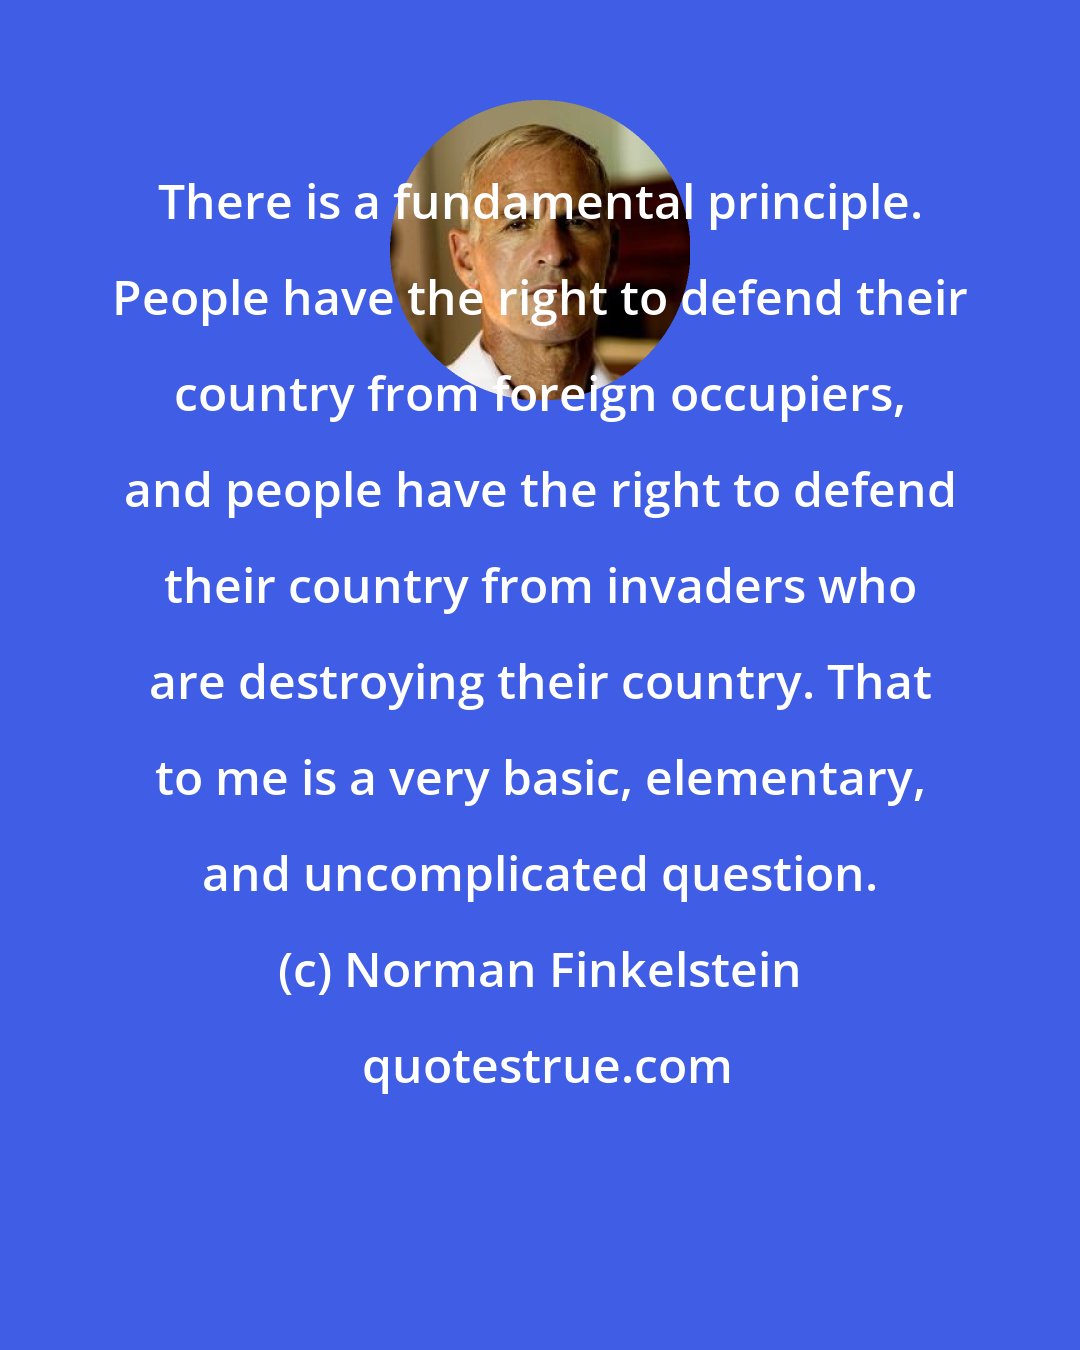 Norman Finkelstein: There is a fundamental principle. People have the right to defend their country from foreign occupiers, and people have the right to defend their country from invaders who are destroying their country. That to me is a very basic, elementary, and uncomplicated question.